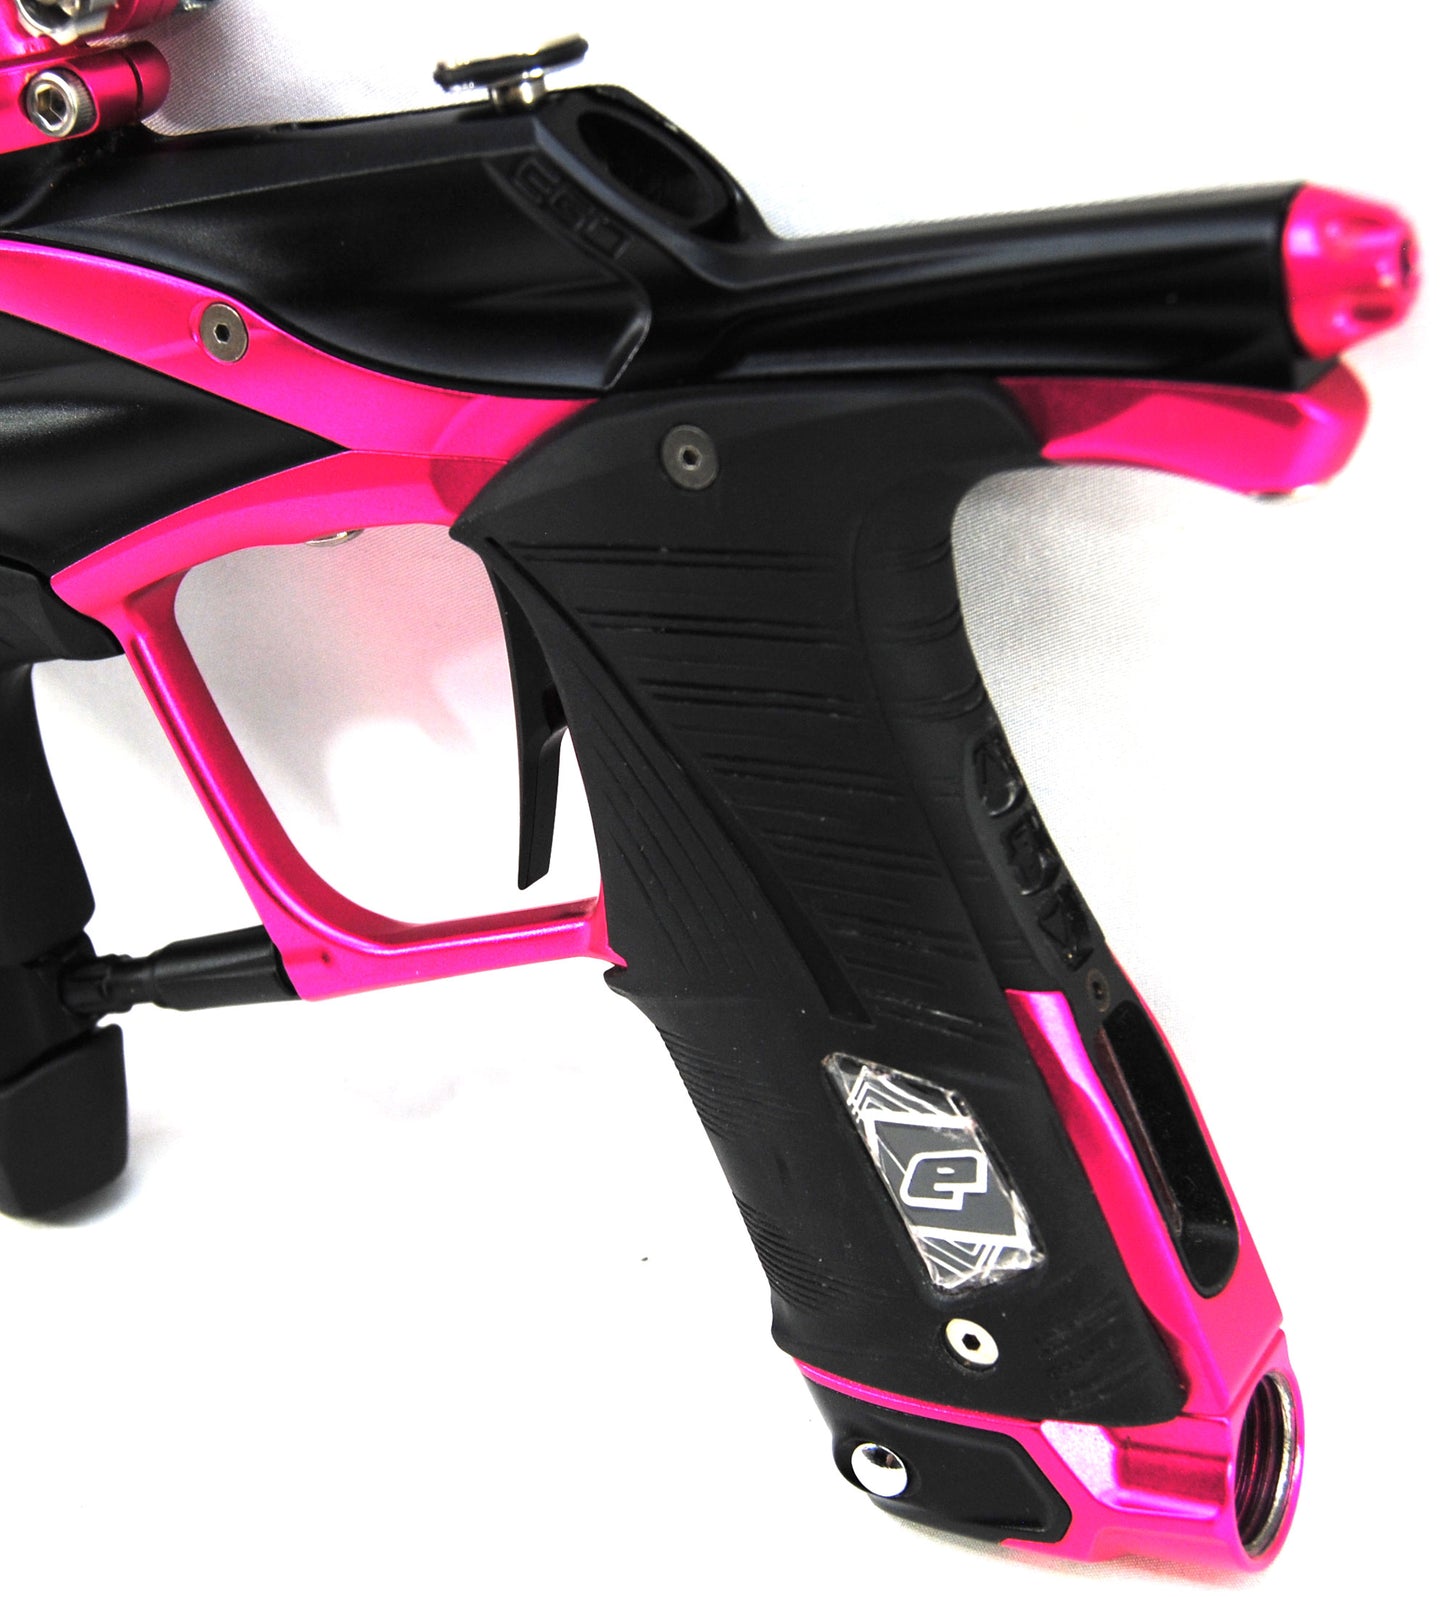 Used Planet Eclipse LV1.5 - Black/Pink